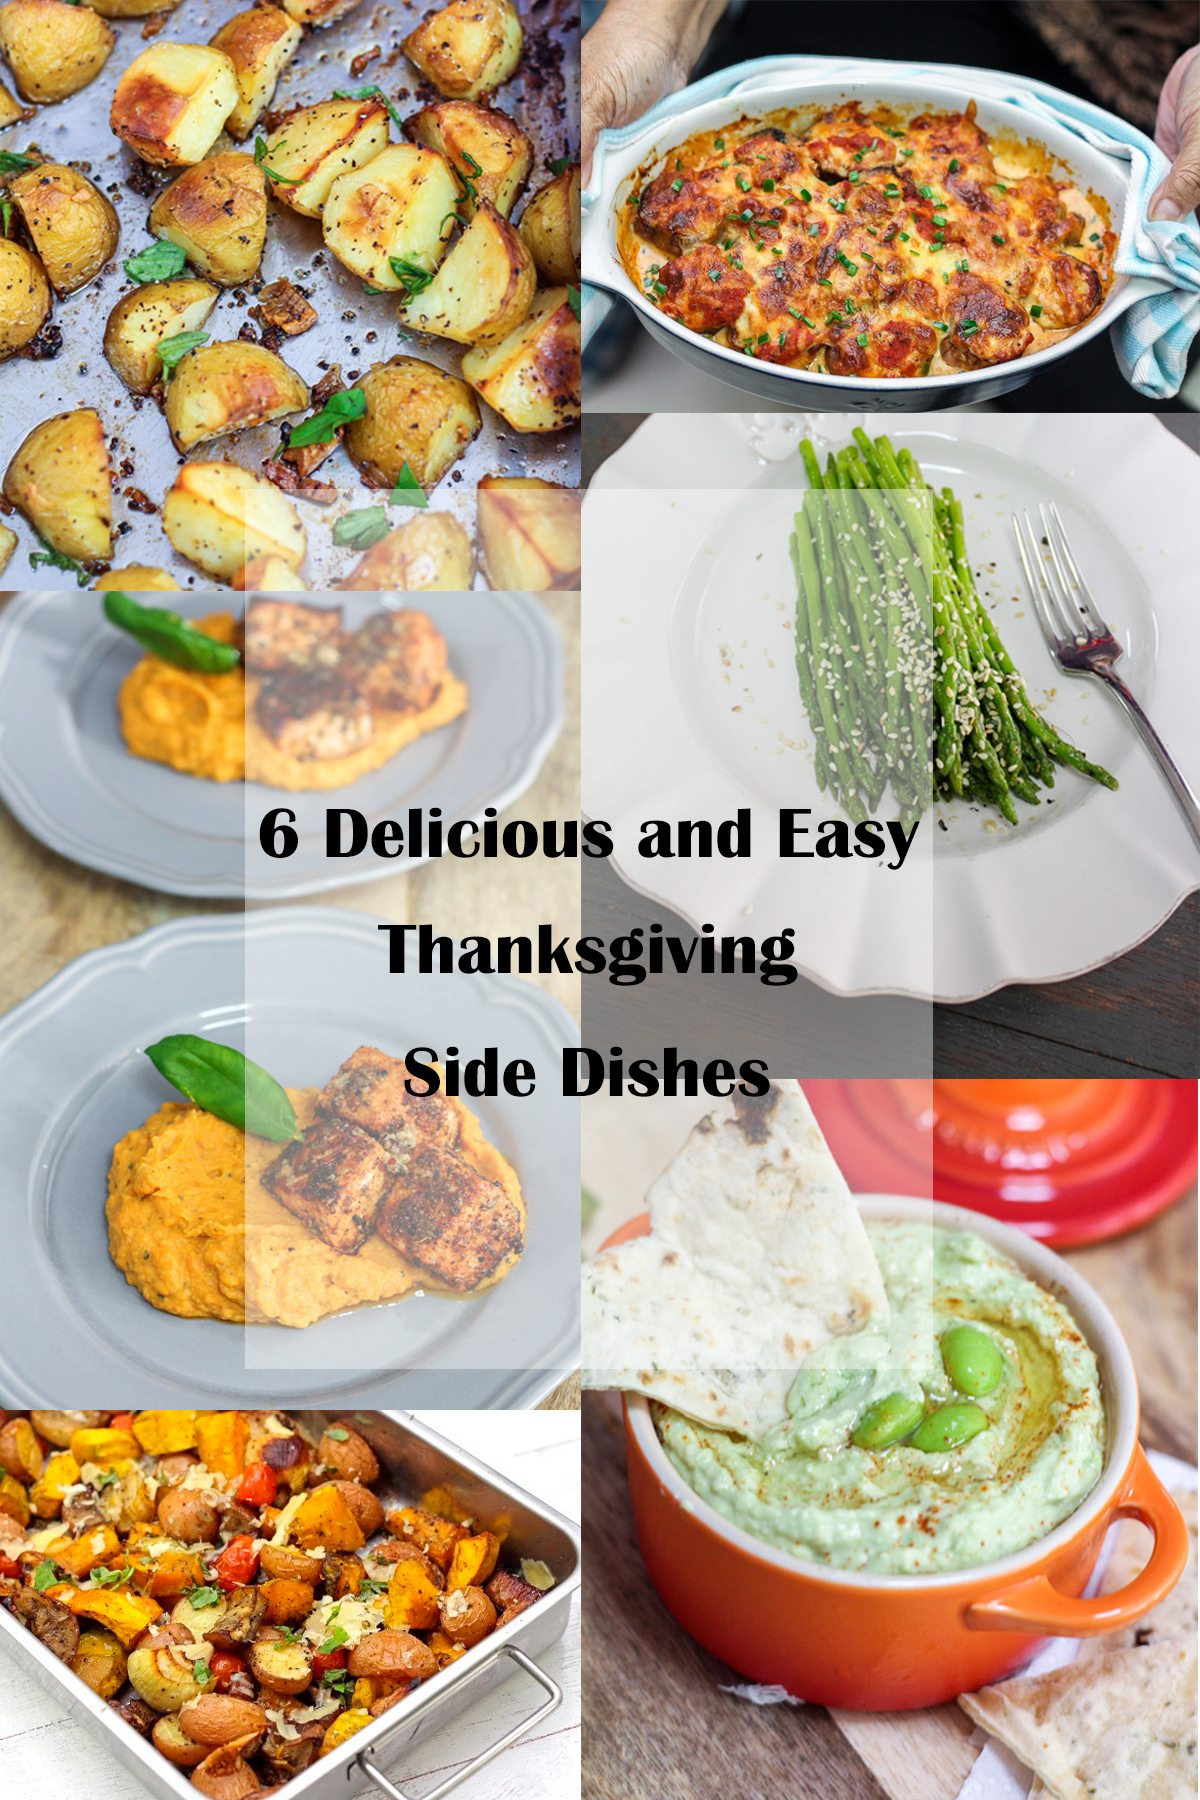 Most Popular Thanksgiving Side Dishes
 6 Delicious and Easy Thanksgiving Side Dishes